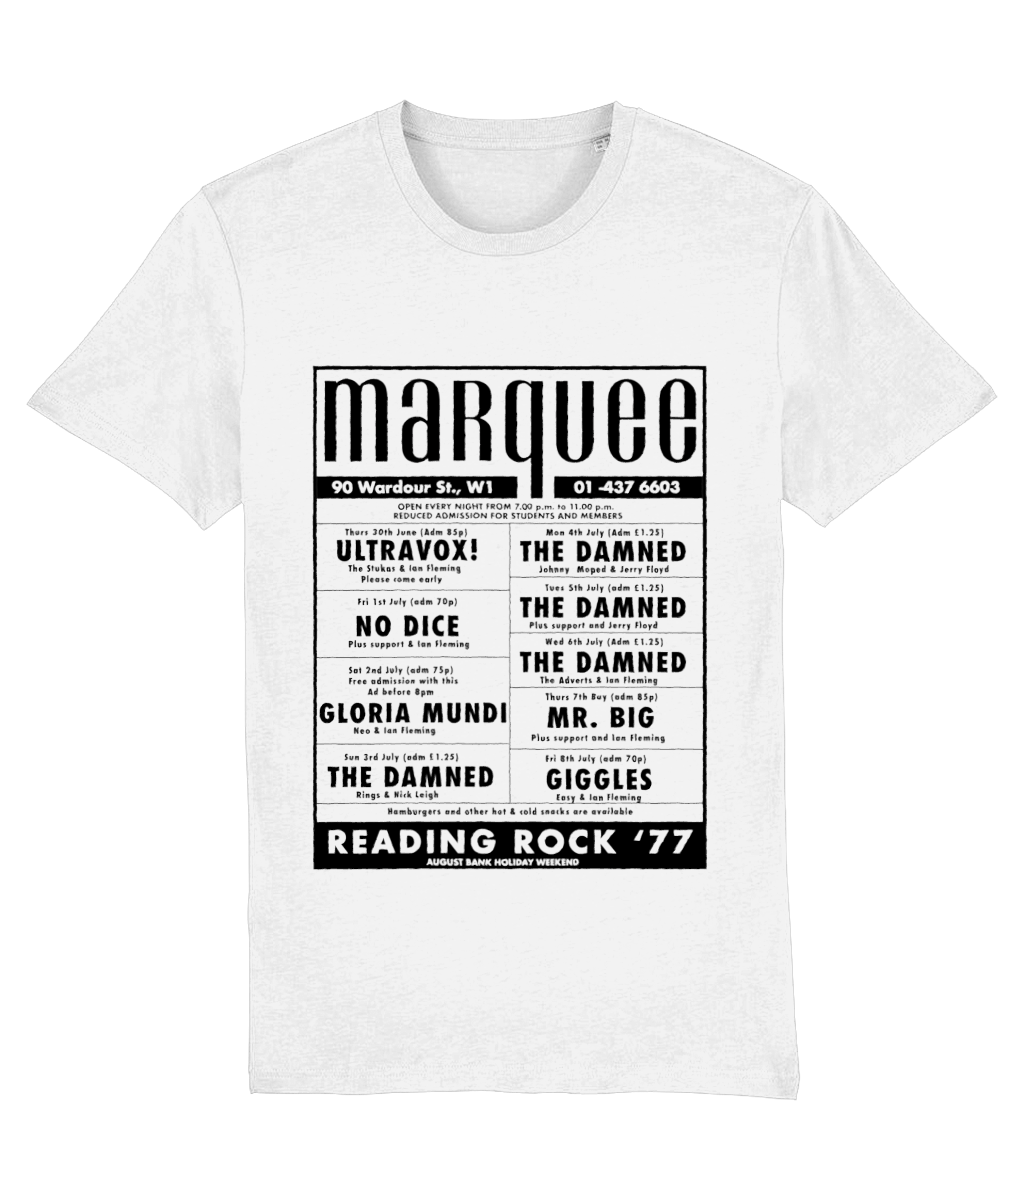 The Damned T-shirt